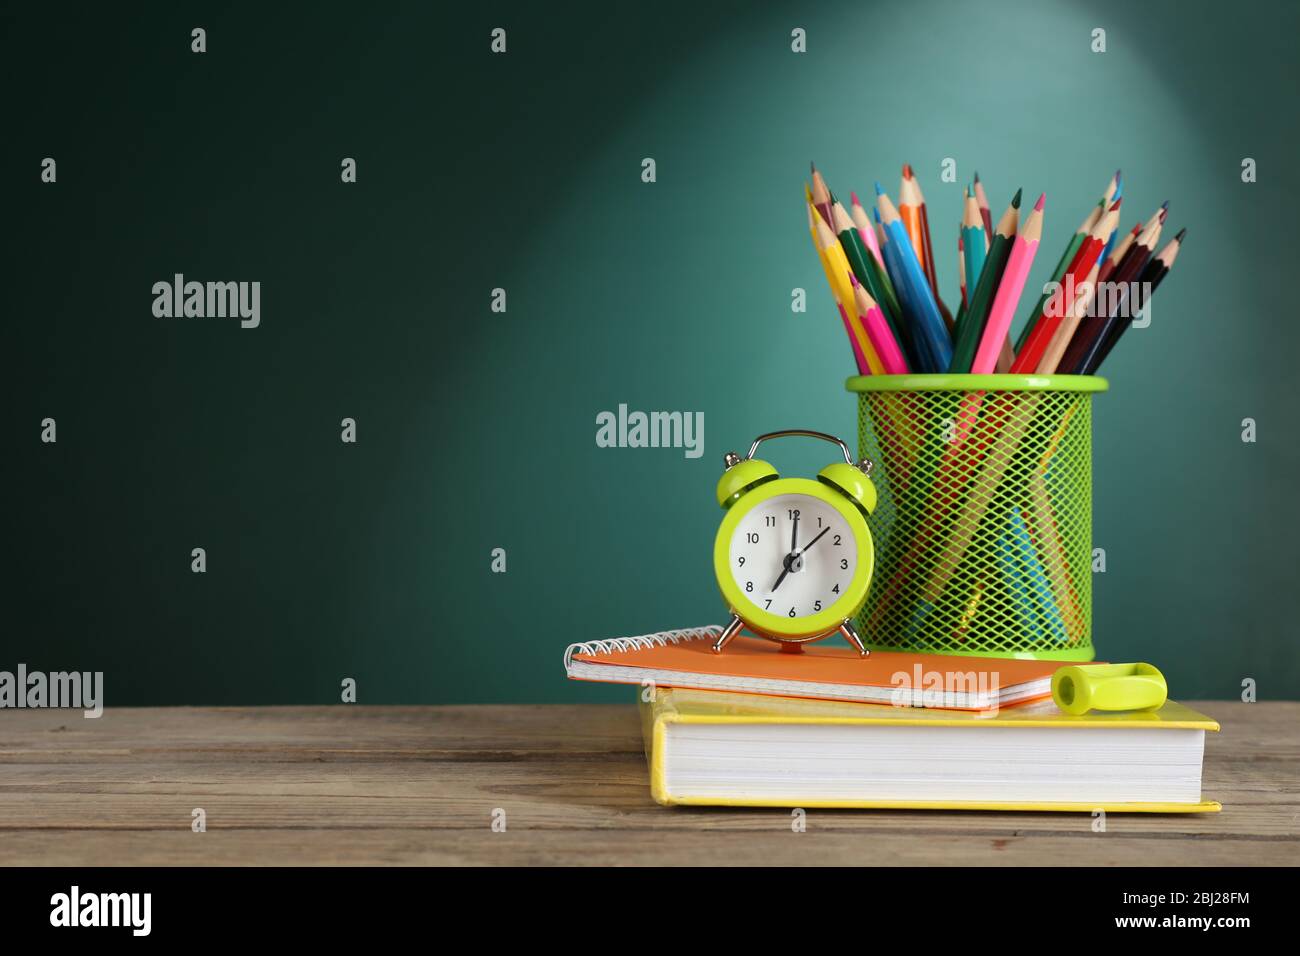 Back to school template on green chalkboard background Stock Photo - Alamy